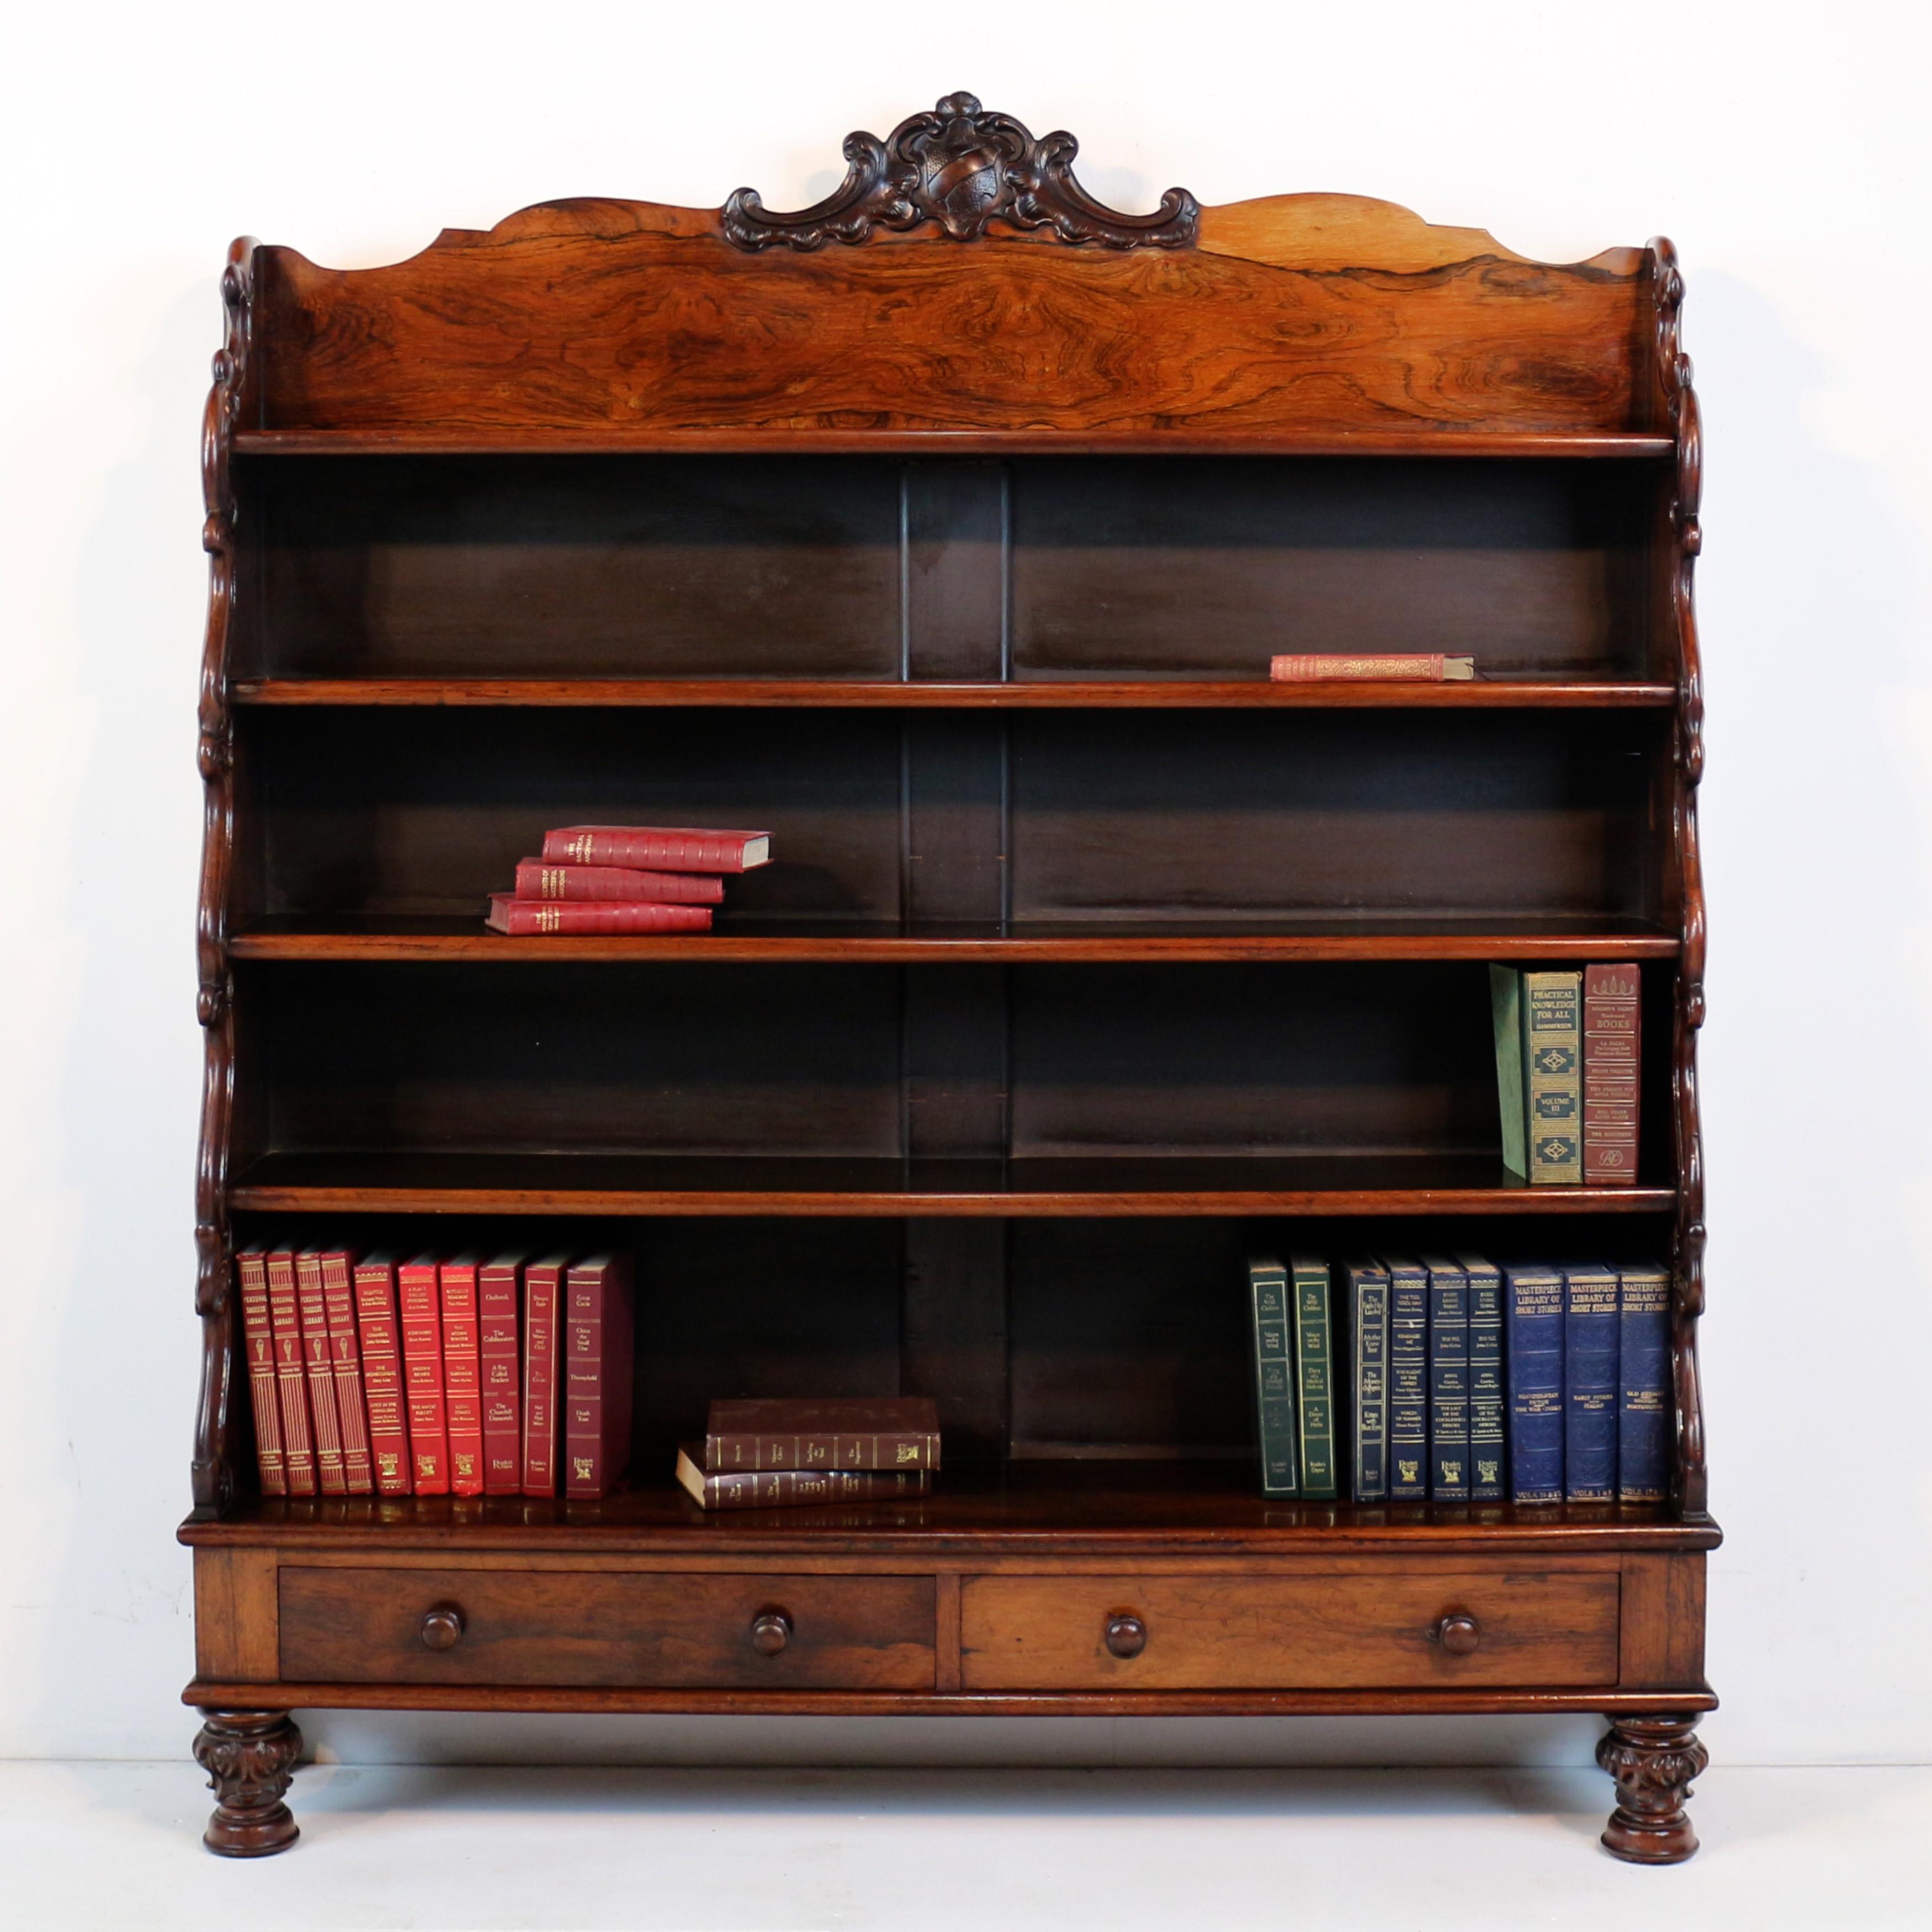 Furnish your home with timeless elegance – introducing our antique Regency rosewood waterfall bookcase, made in England circa 1820. Crafted with exquisite attention to detail, this piece seamlessly blends curving acanthus leaves with a carved shield